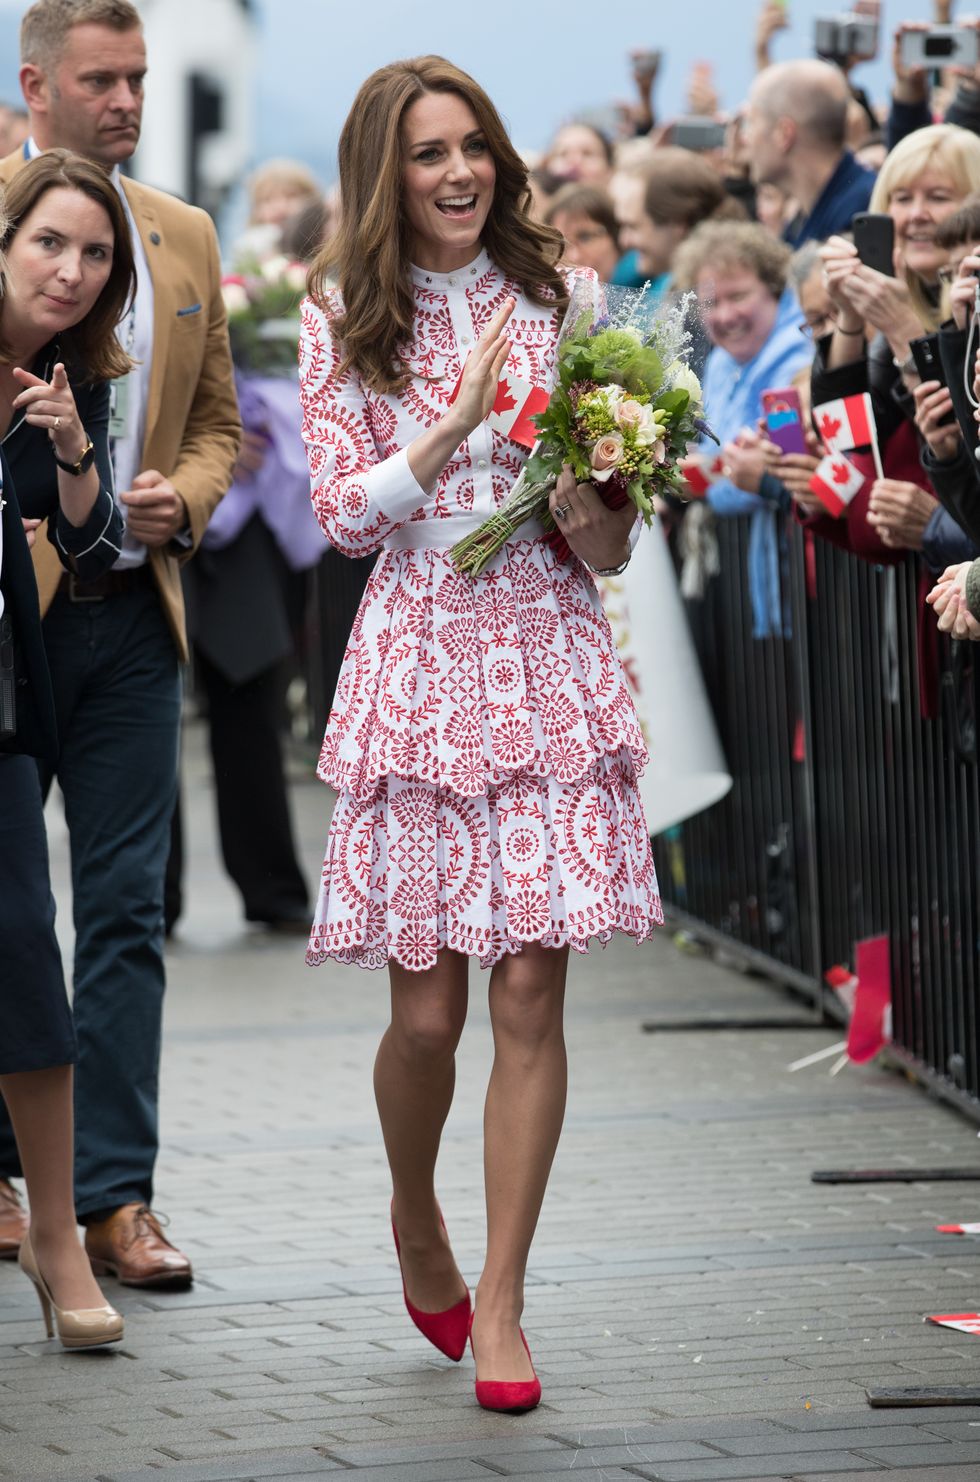 2016 royal tour to canada of the duke and duchess of cambridge vancouver, british columbia